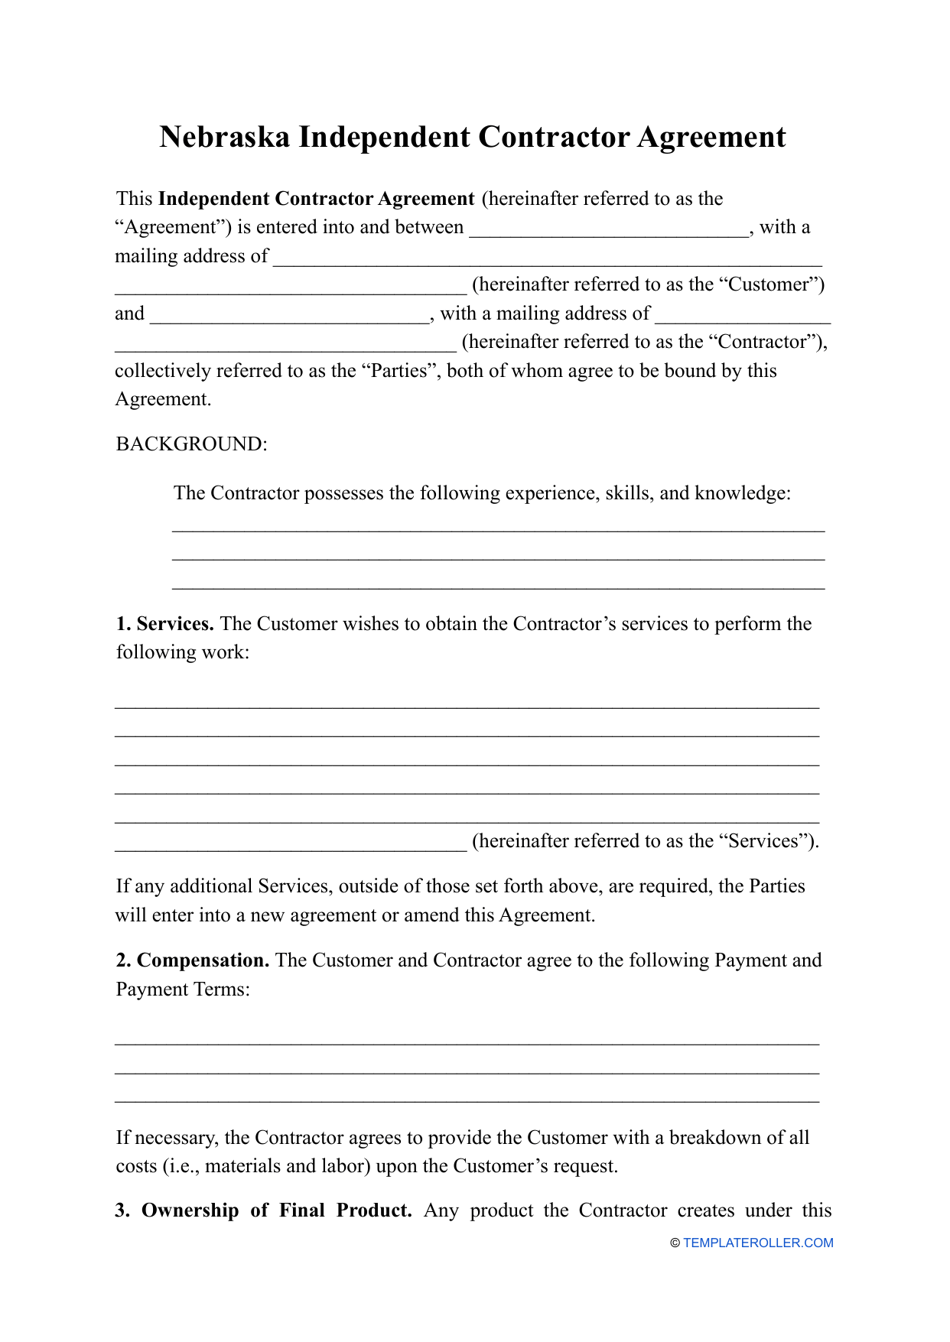 Independent Contractor Agreement Template - Nebraska, Page 1